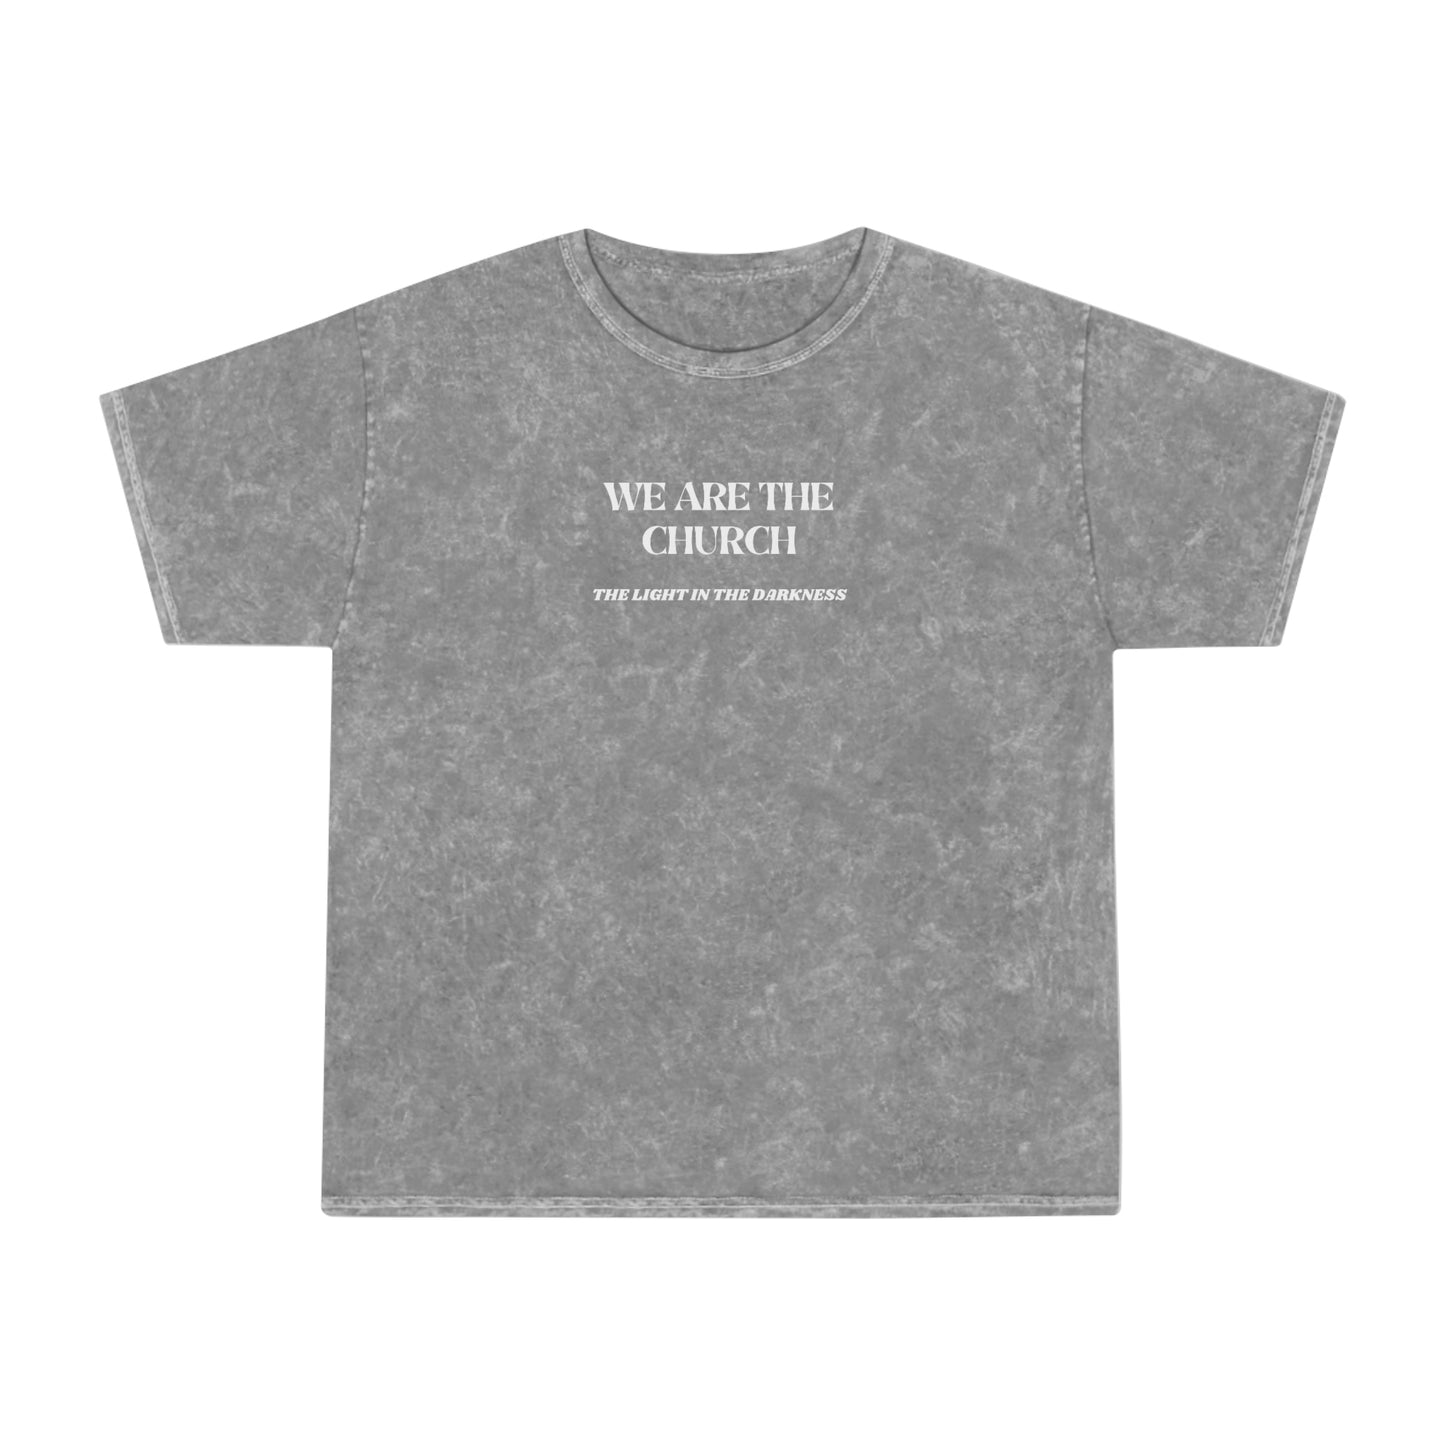 We Are The Church - Unisex Mineral Wash T-Shirt